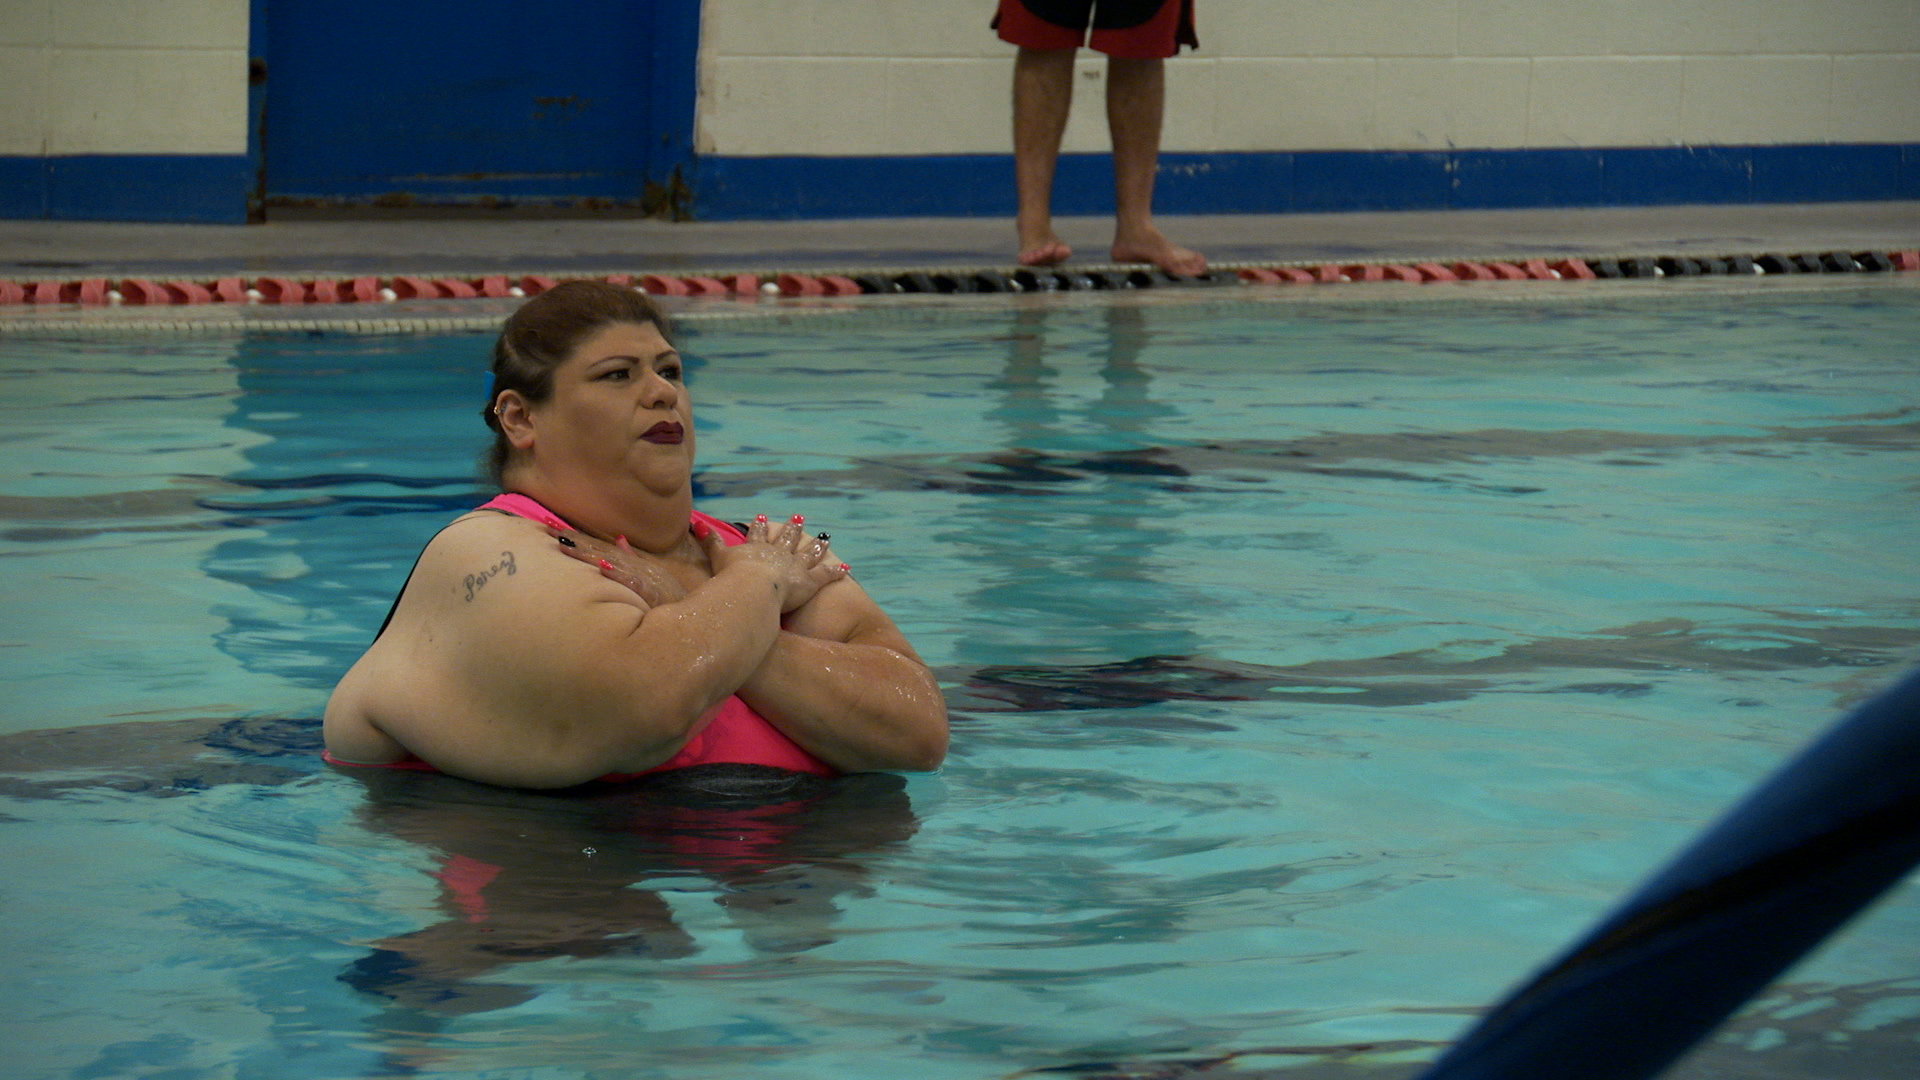 San Antonio's woman's extreme 300-pound weight loss featured on